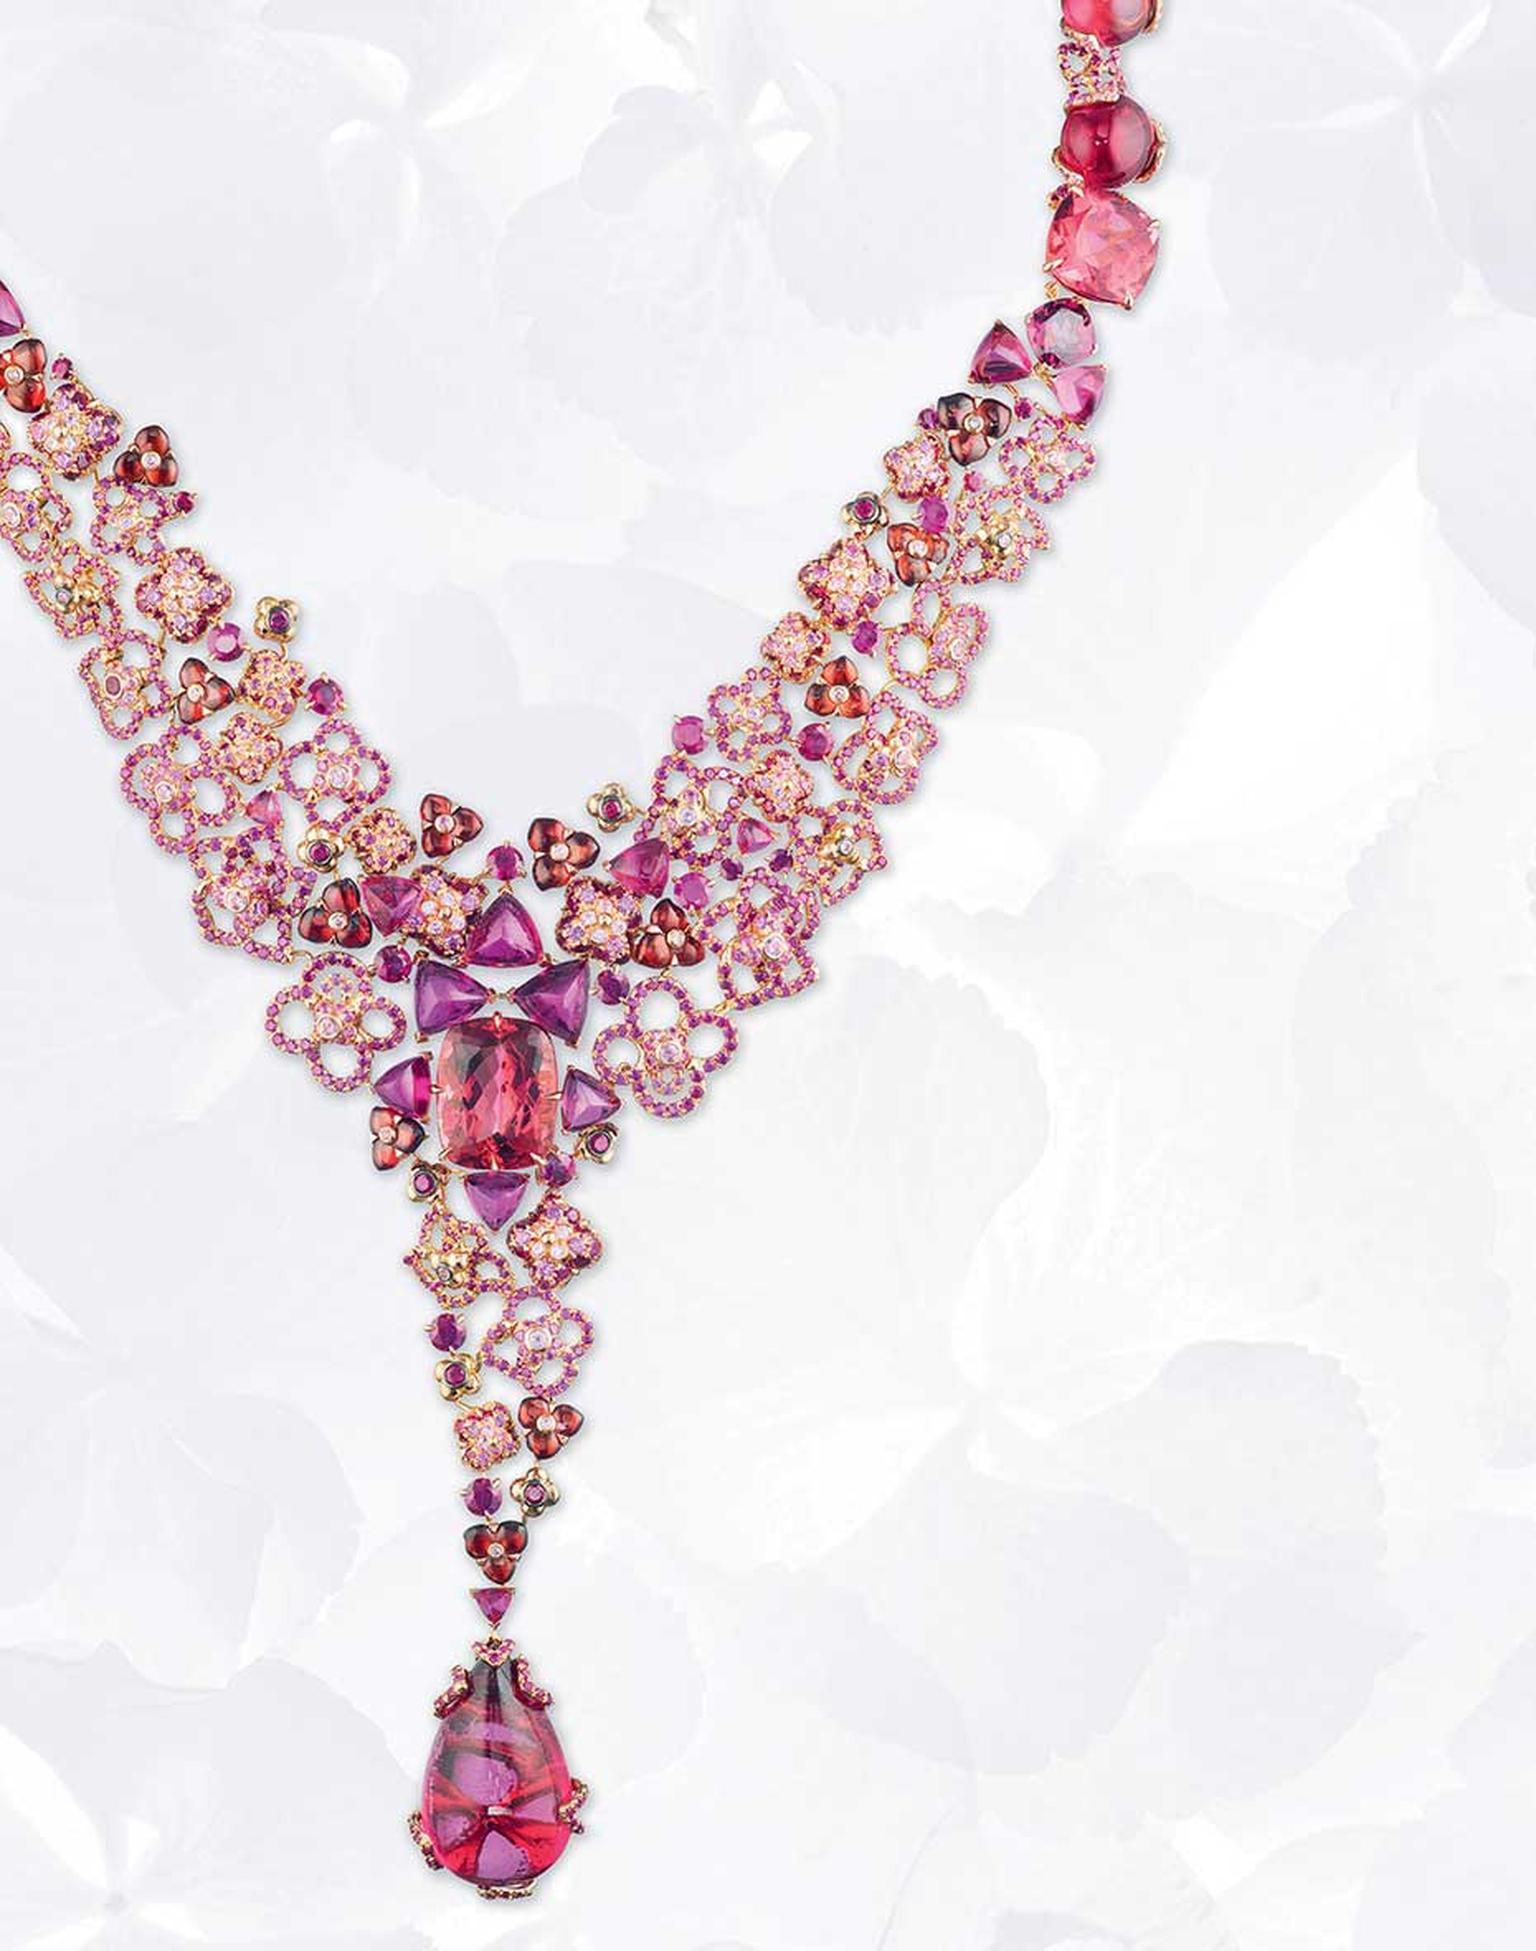 Chaumet's New High Jewellery Collection is Inspired by Nature